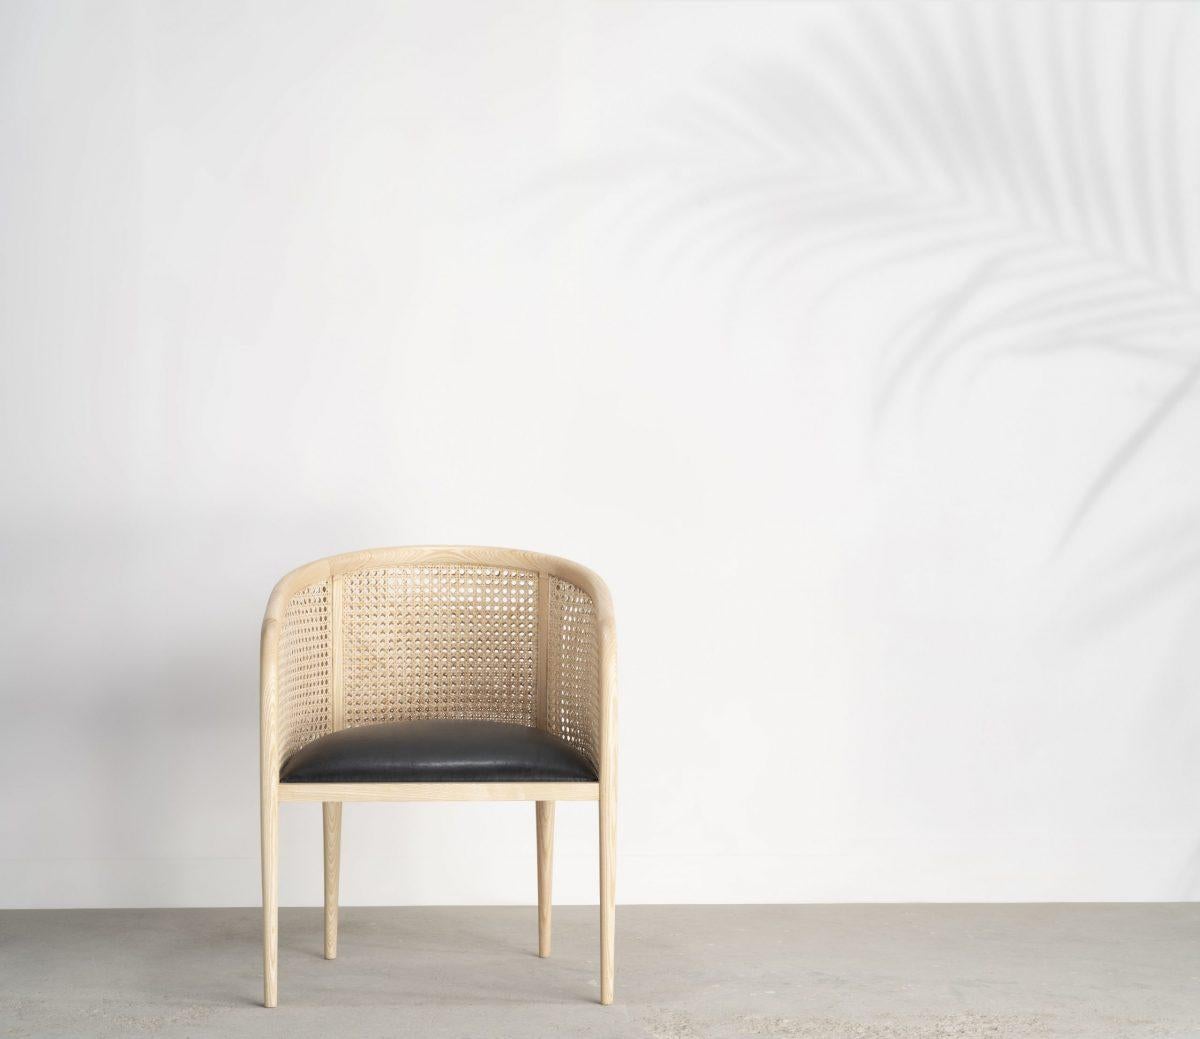 Inspired by a traditional cane chair design, this chair is a contemporary version of a much loved classic that we have seen in many forms. The spoke-shaved frame is a solid ash, given smooth edges accentuated by the rich black polish or gentle